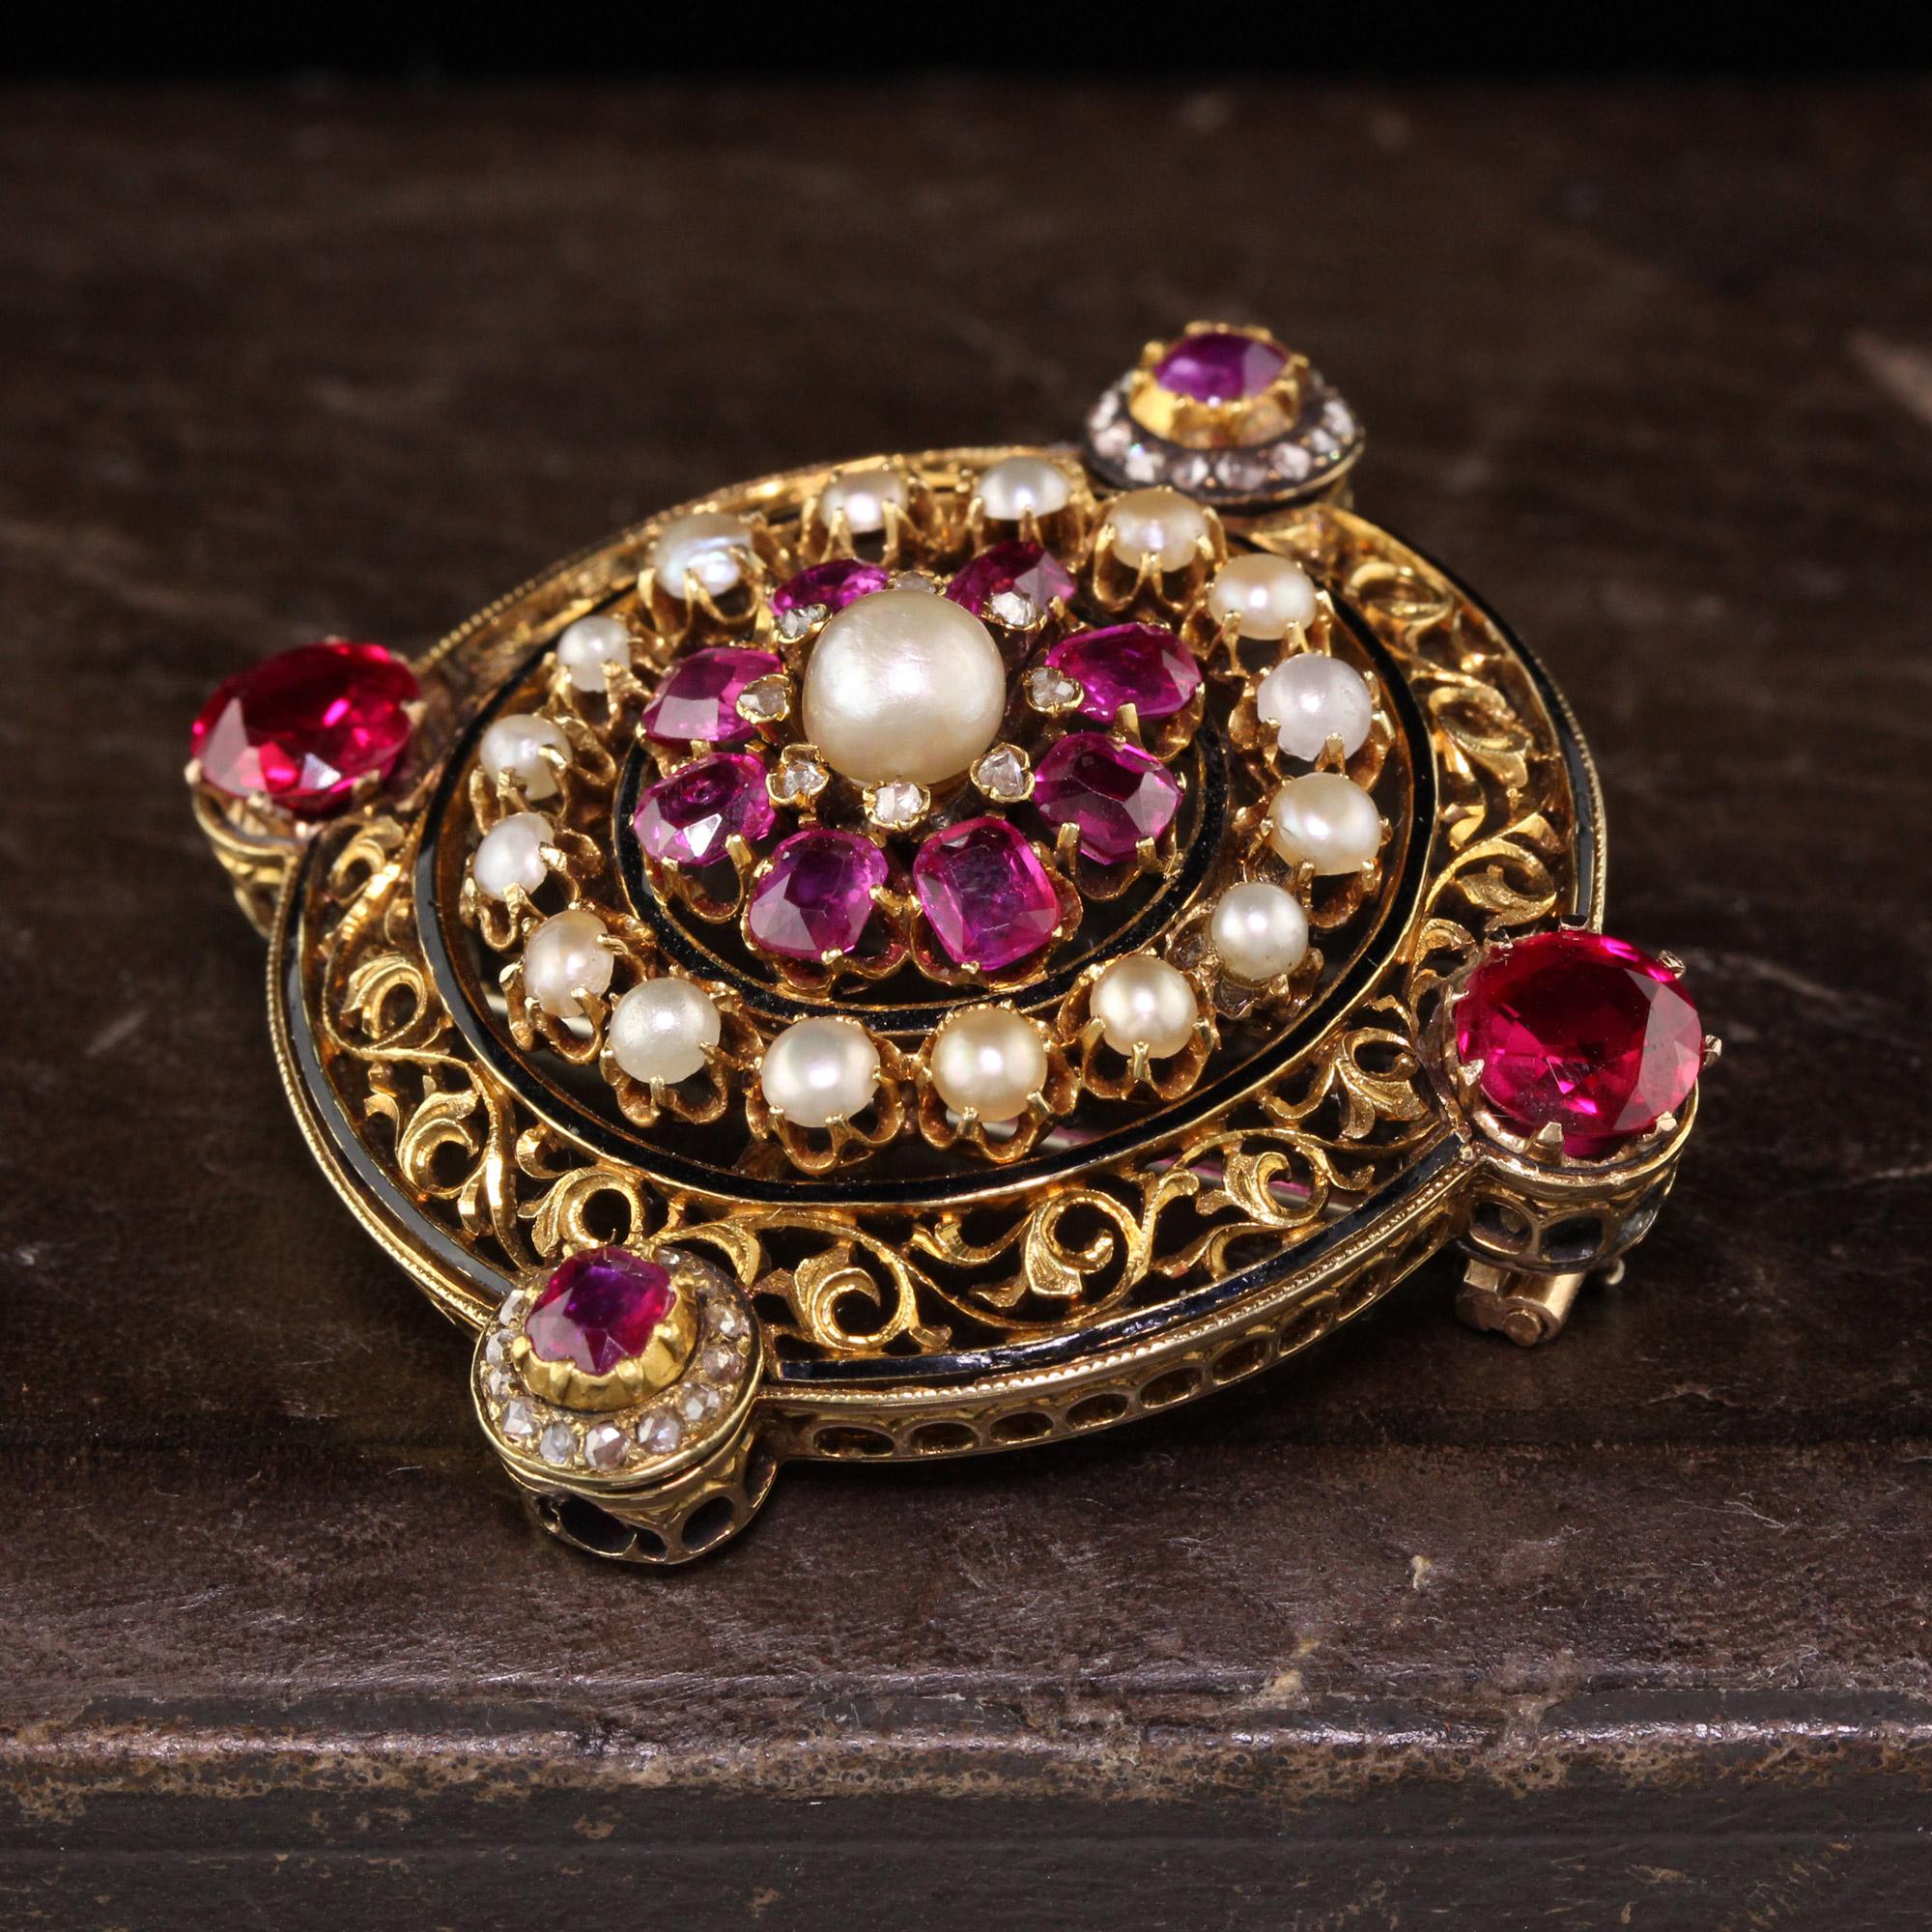 Gorgeous Antique Victorian 18K Yellow Gold Black Enamel Ruby Pearl Diamond Pin. This unbelievable pin features gorgeous rubies, natural pearls and rose cut diamonds. The larger side rubies are believed to by synthetic rubies. 

Item #P0101

Metal: